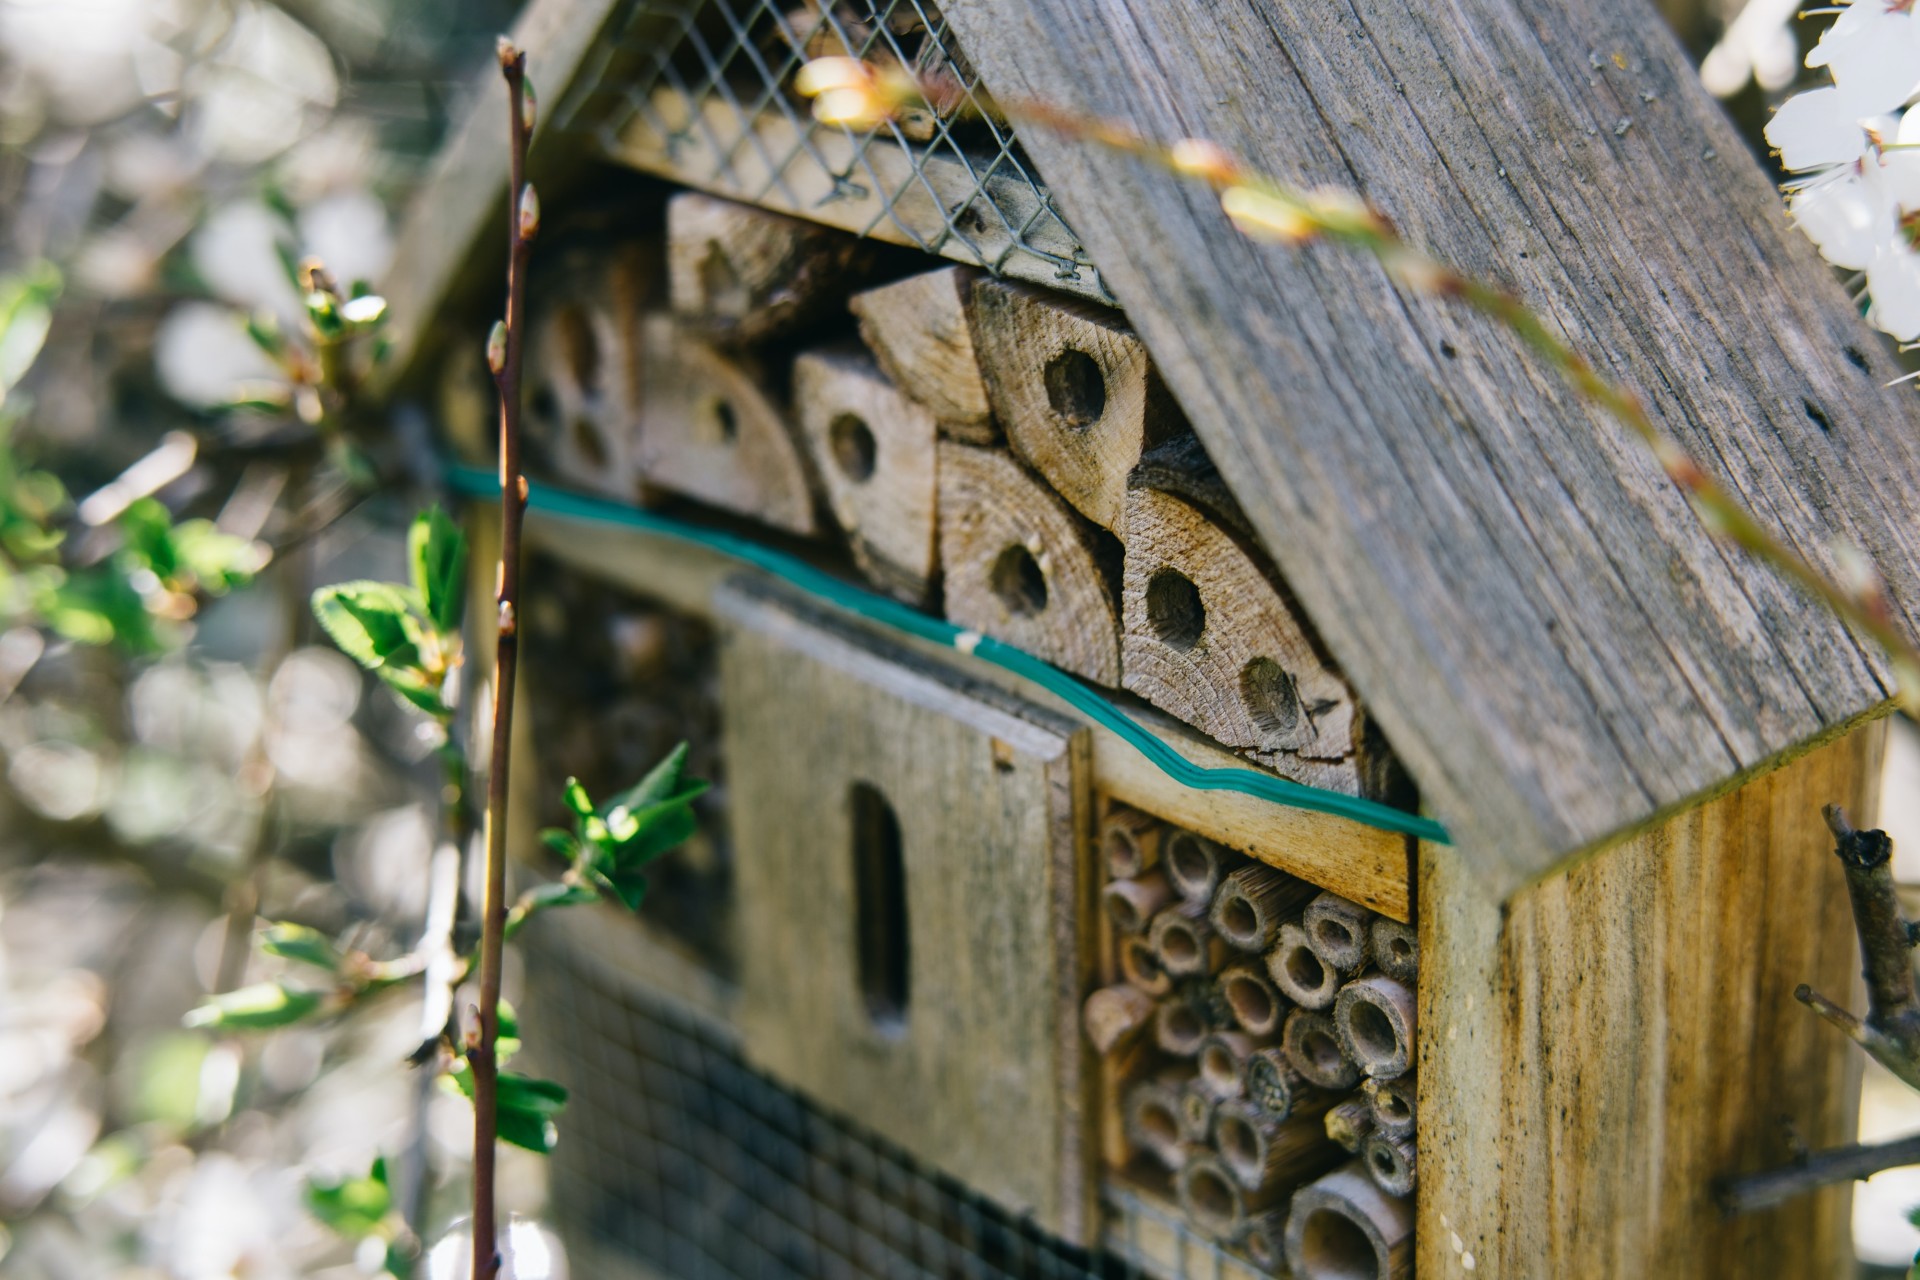 Training in building houses for insects and bees